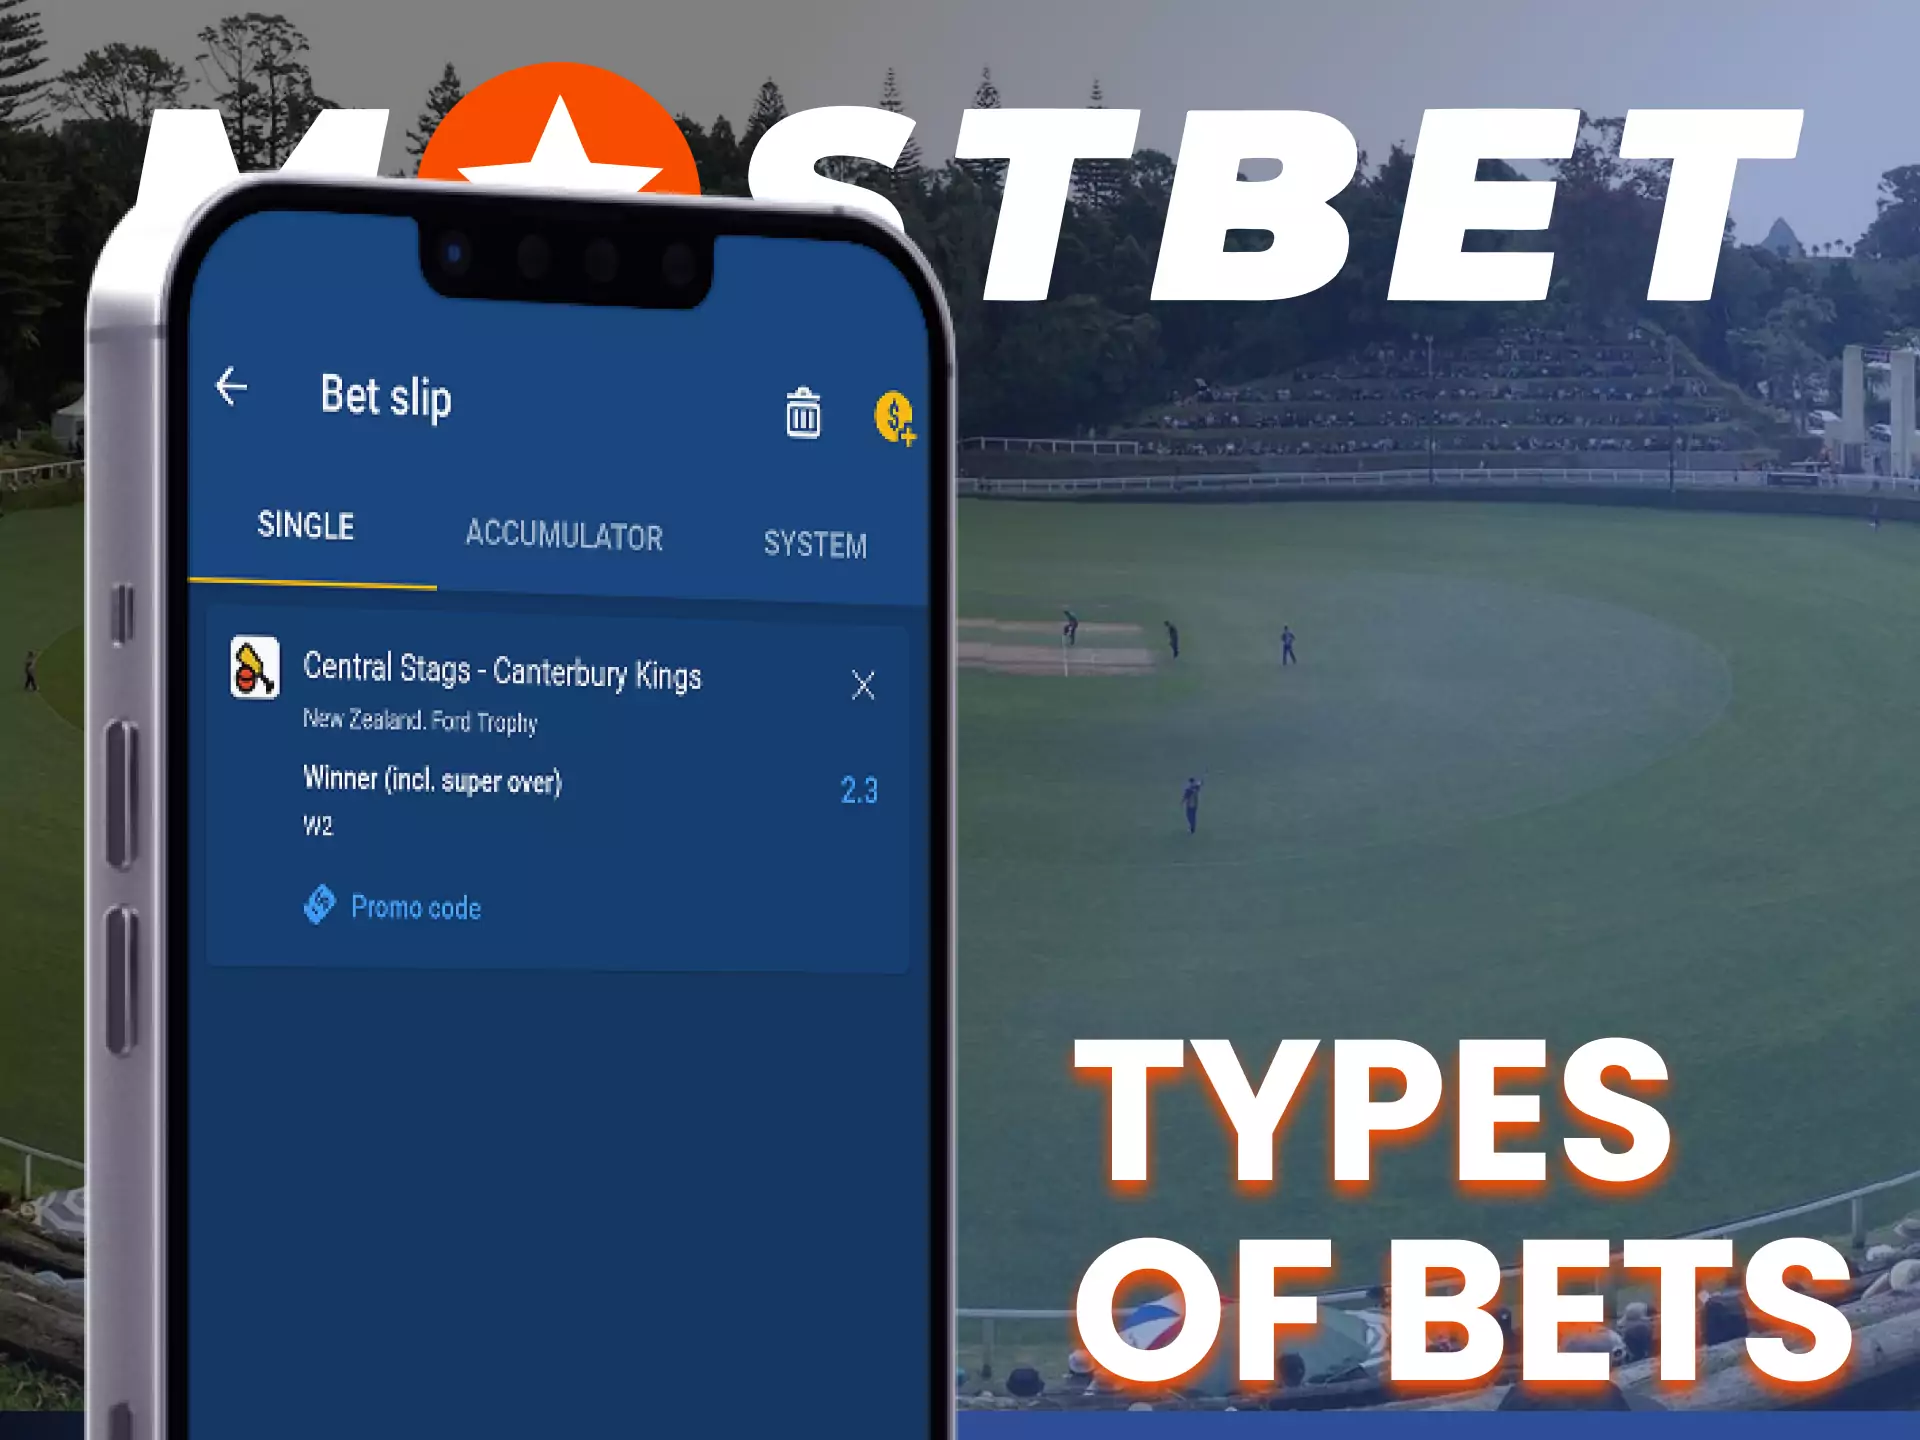 With Mostbet app make bets of different types.